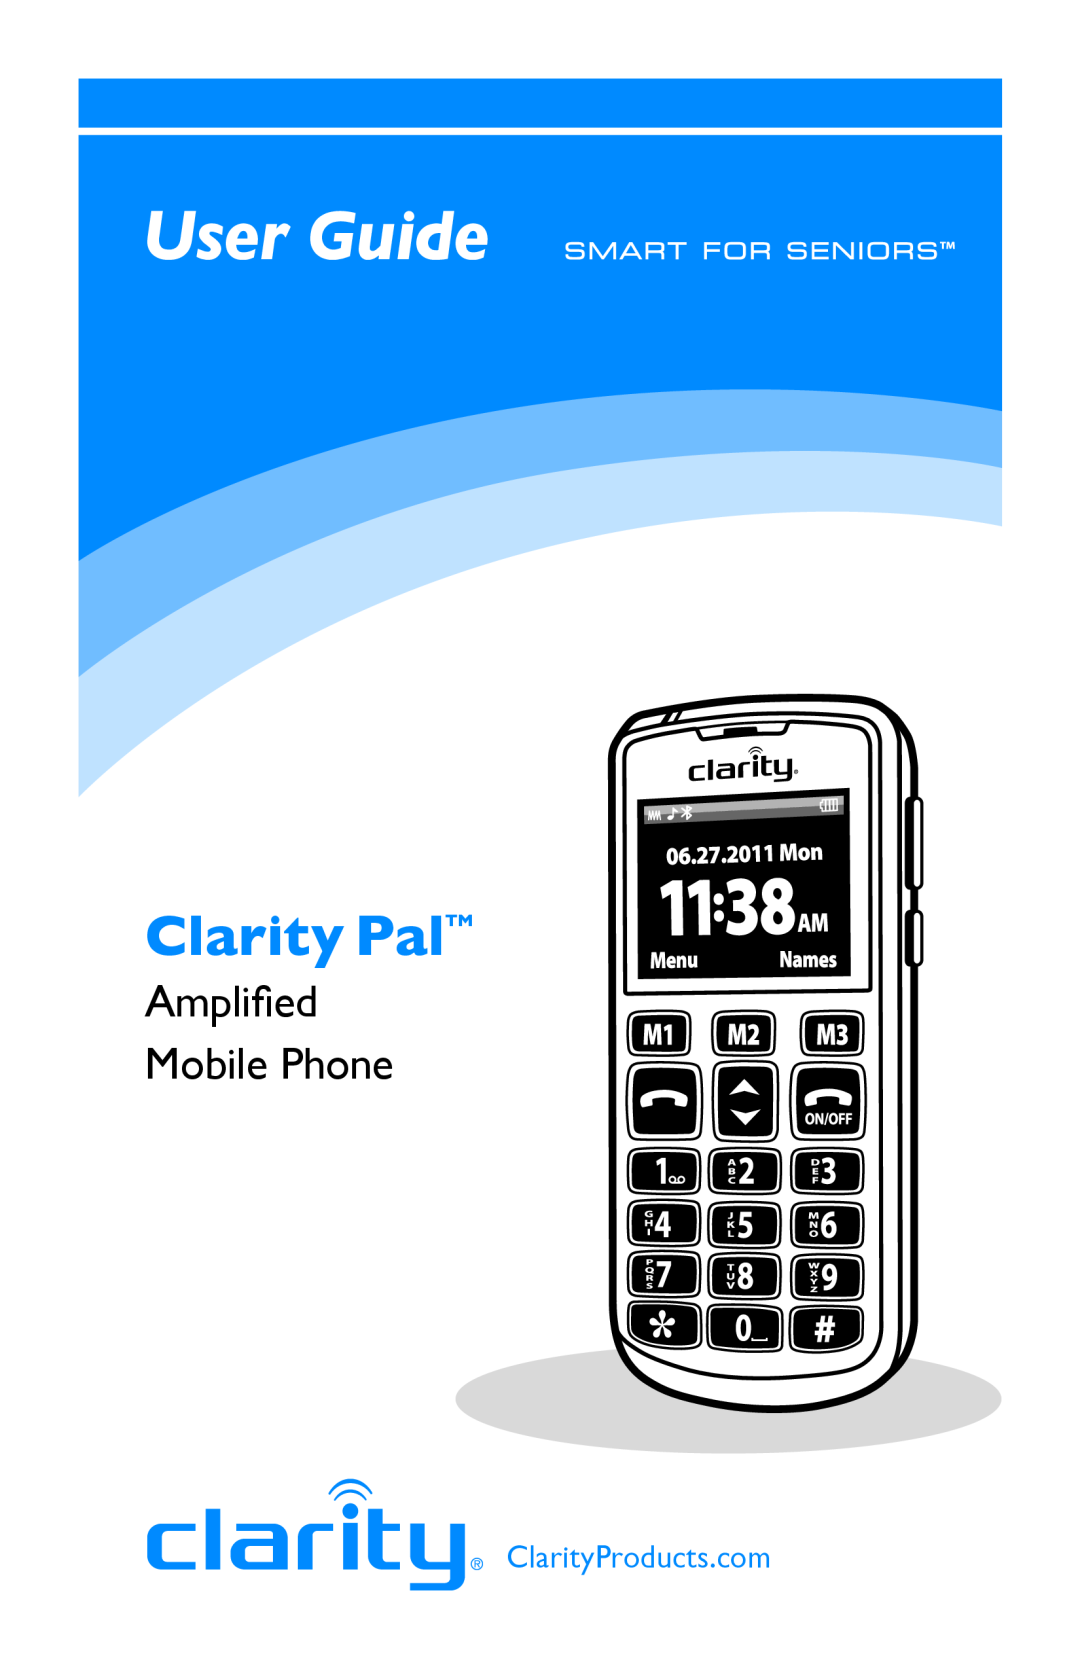 Clarity manual User Guide, Clarity PalTM, Amplified Mobile Phone, ClarityProducts.com 